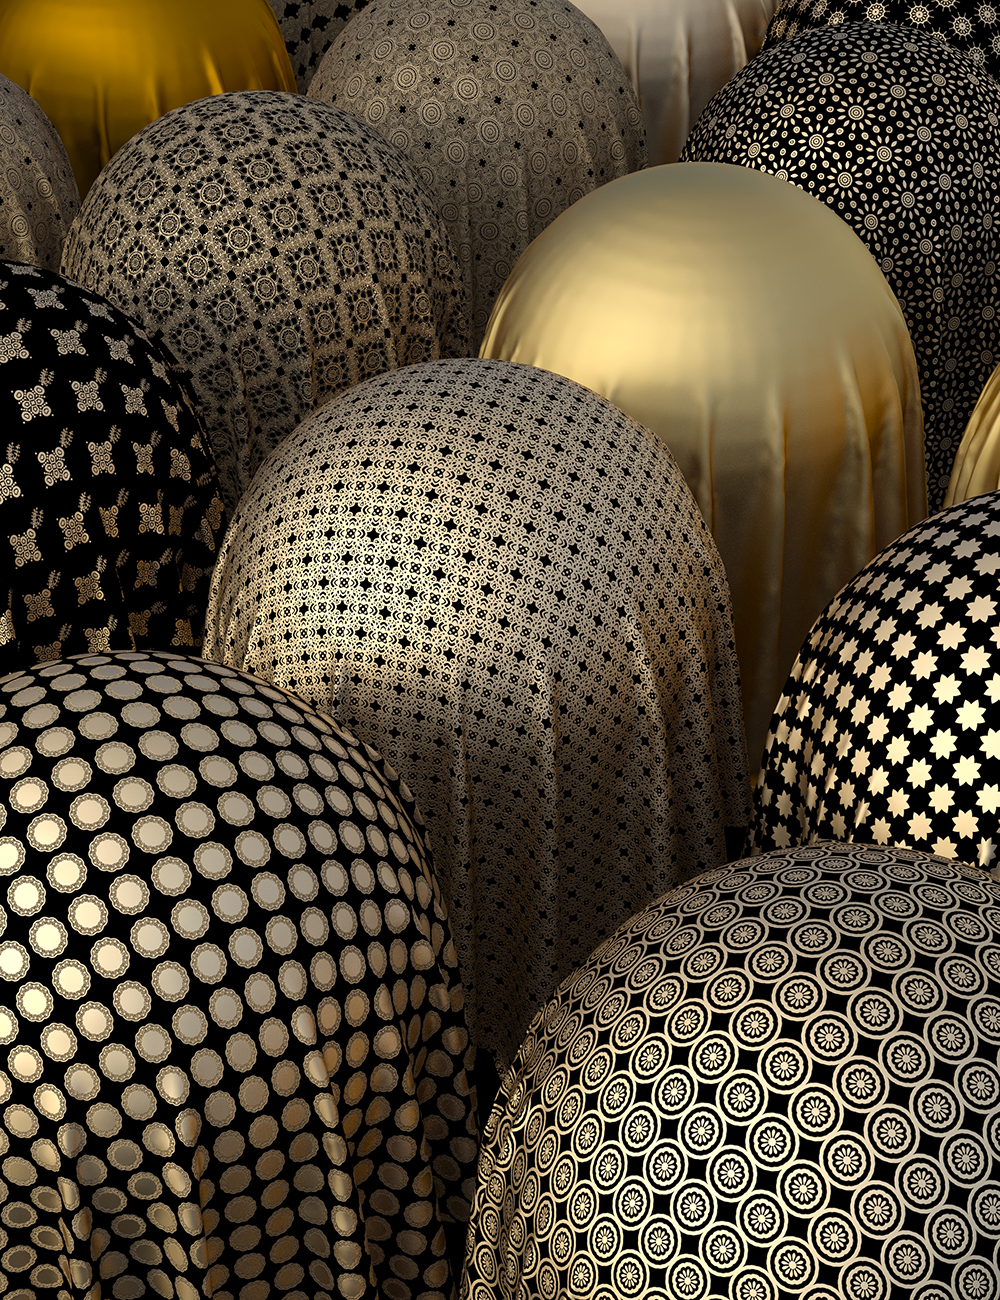 Golden Collection Fabric Iray Shaders by: Nelmi, 3D Models by Daz 3D